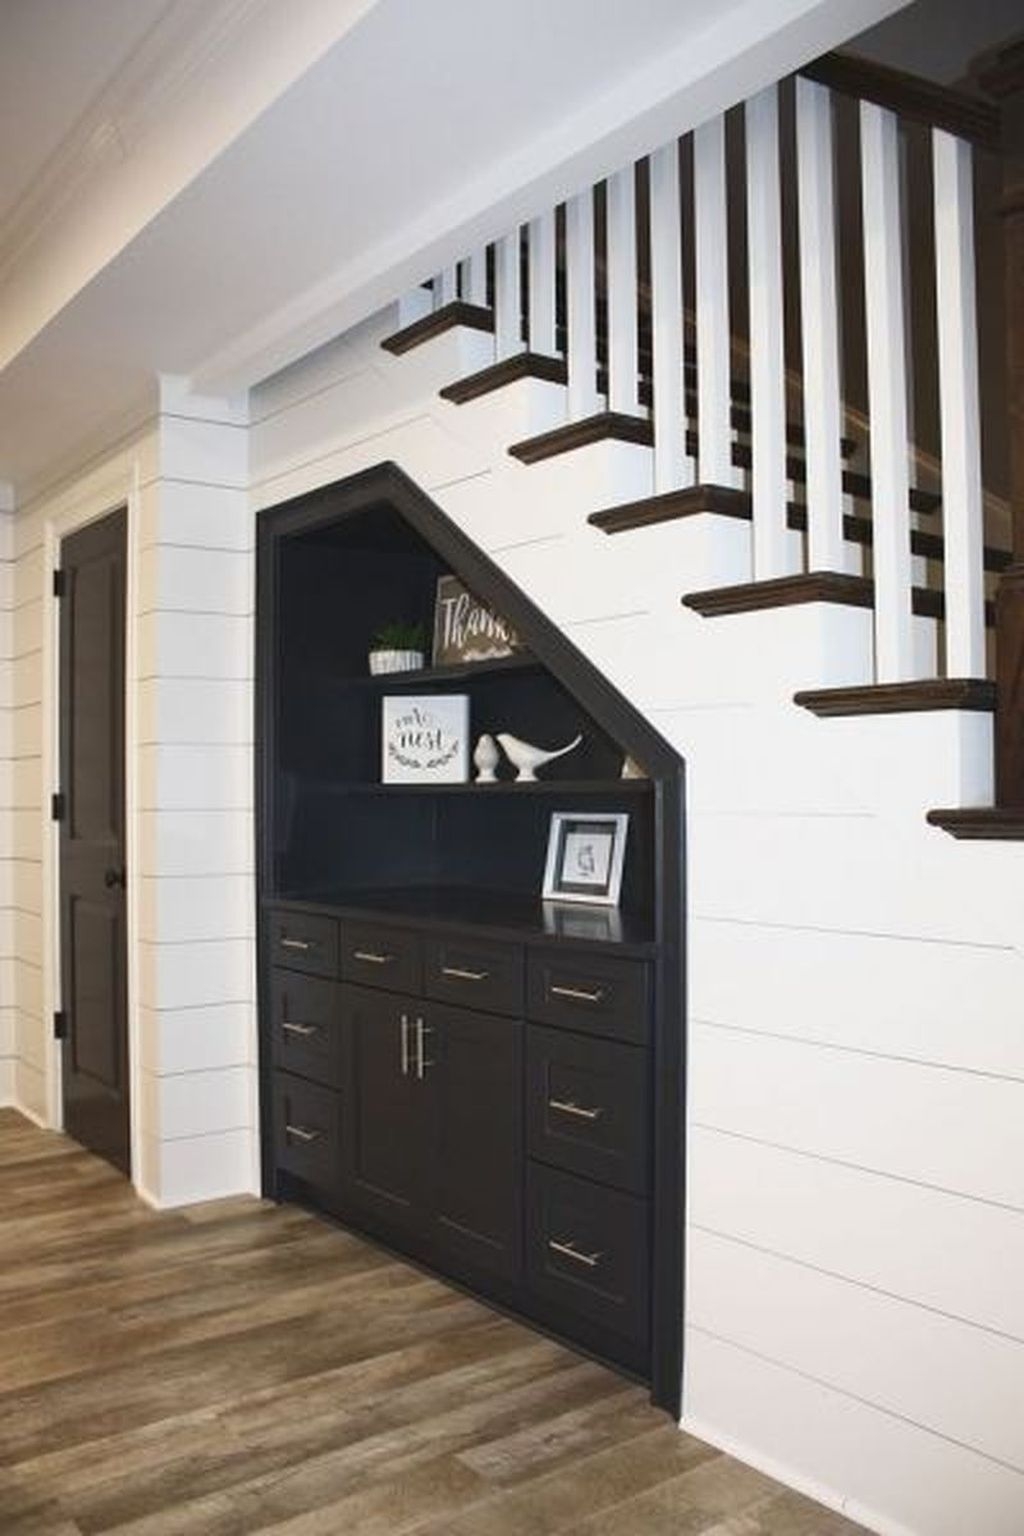 Brilliant Storage Ideas For Under Stairs To Try Asap 35